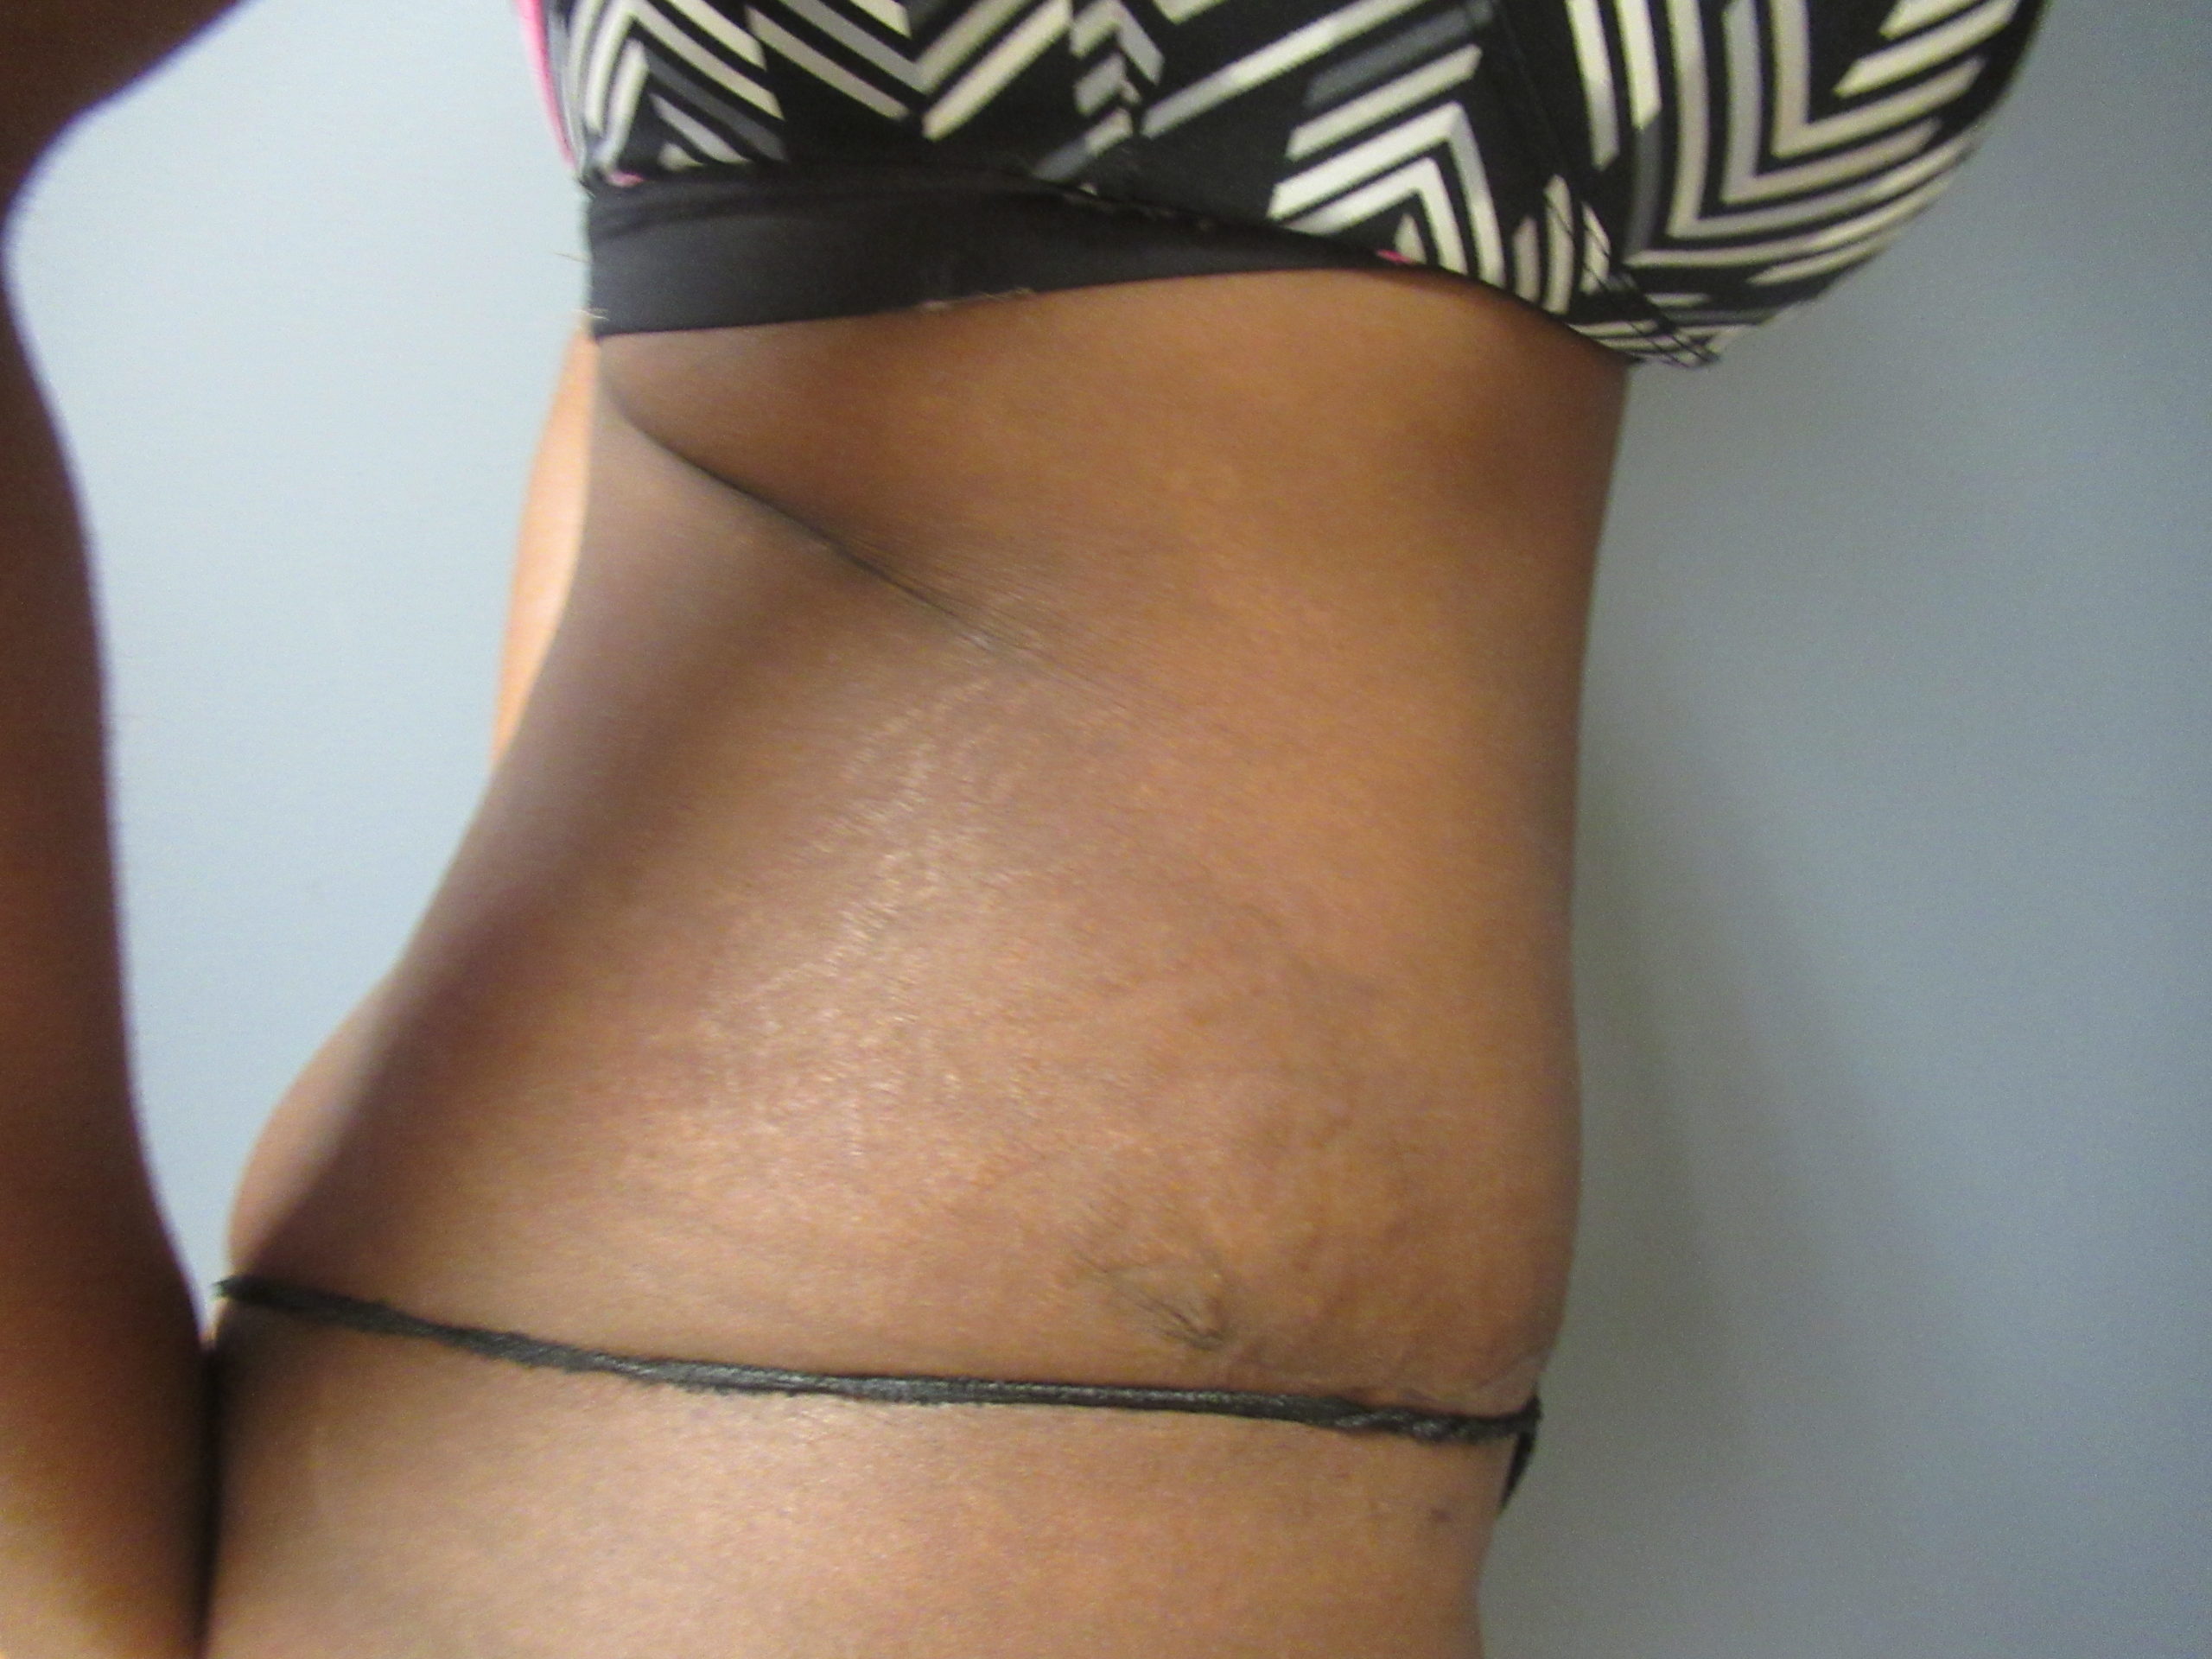 after extended panniculectomy with liposuction